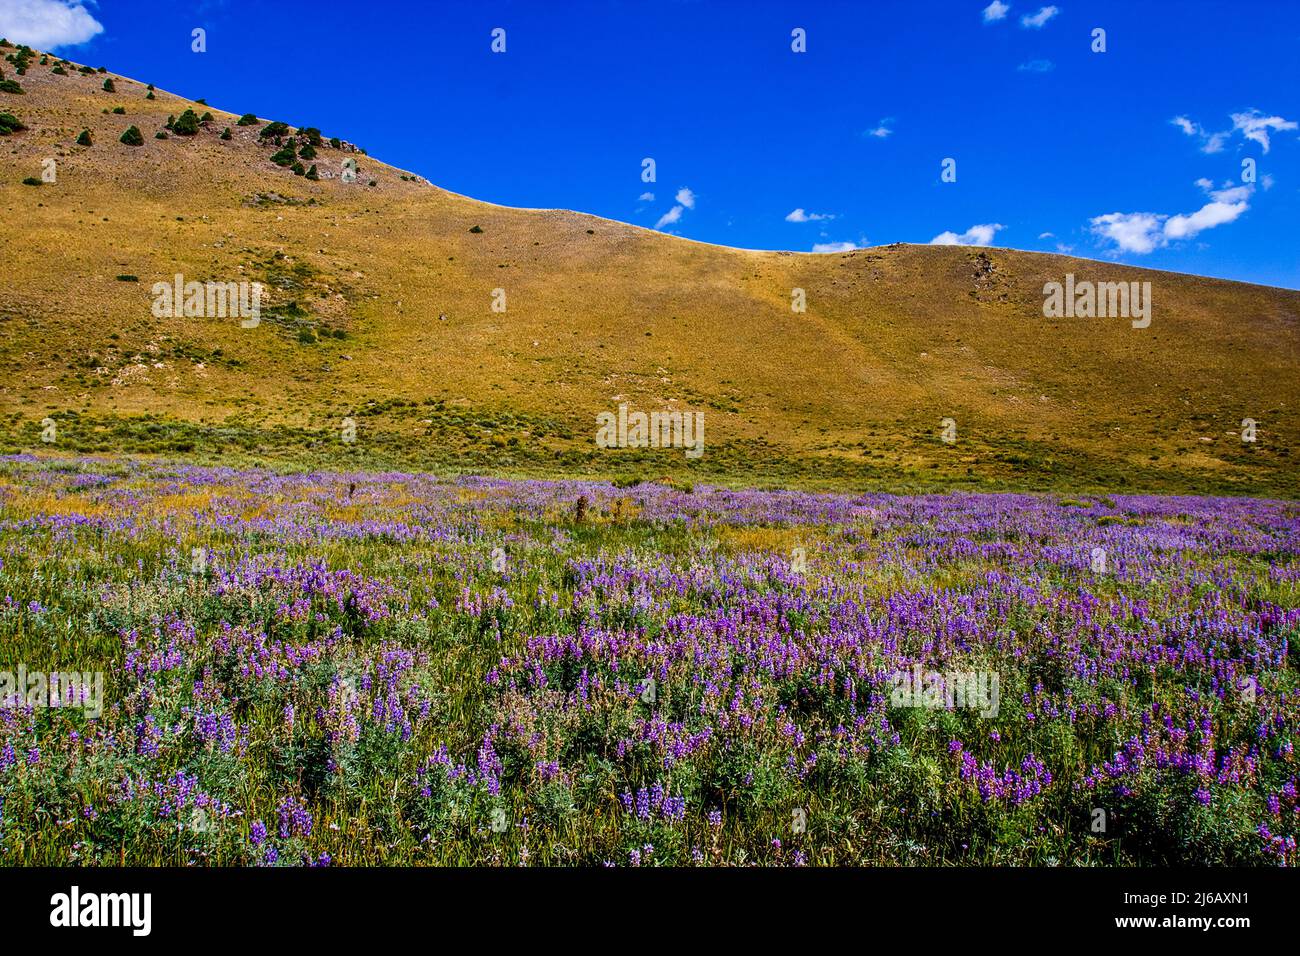 Looking into a hill at the elk refuge in Grand Teton National Park. A field of flowers covers half the hill. Stock Photo